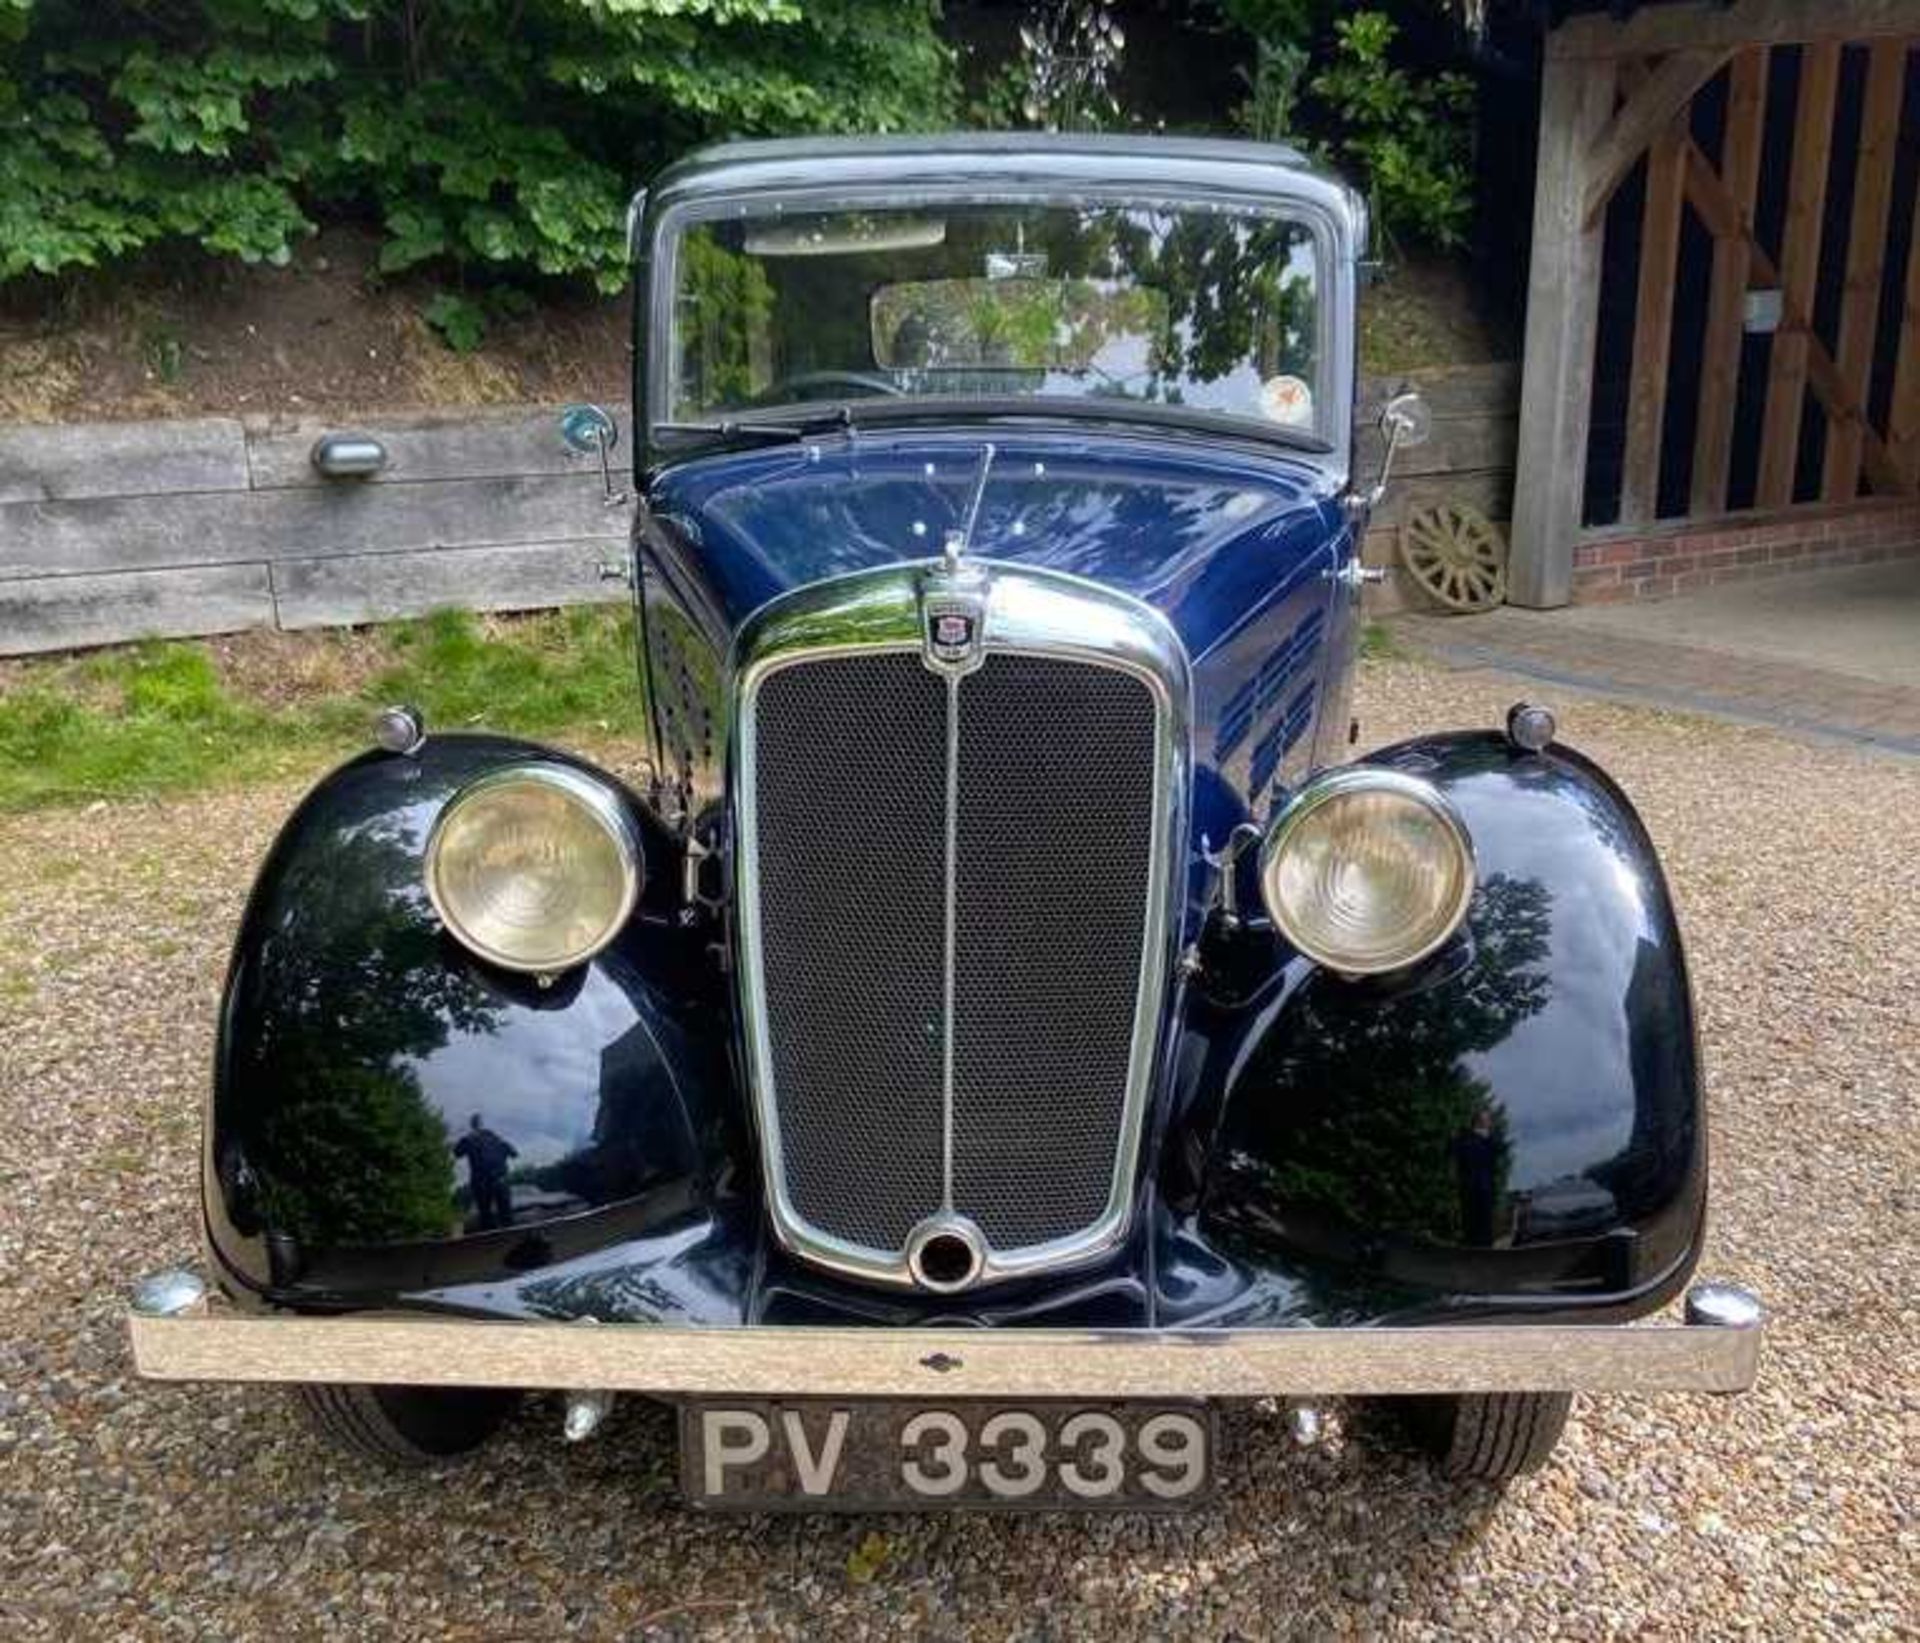 A 1936 Morris 10/4 saloon 1292cc Registration PV339 Odometer 555313 In blue and black Chassis No. - Image 3 of 13